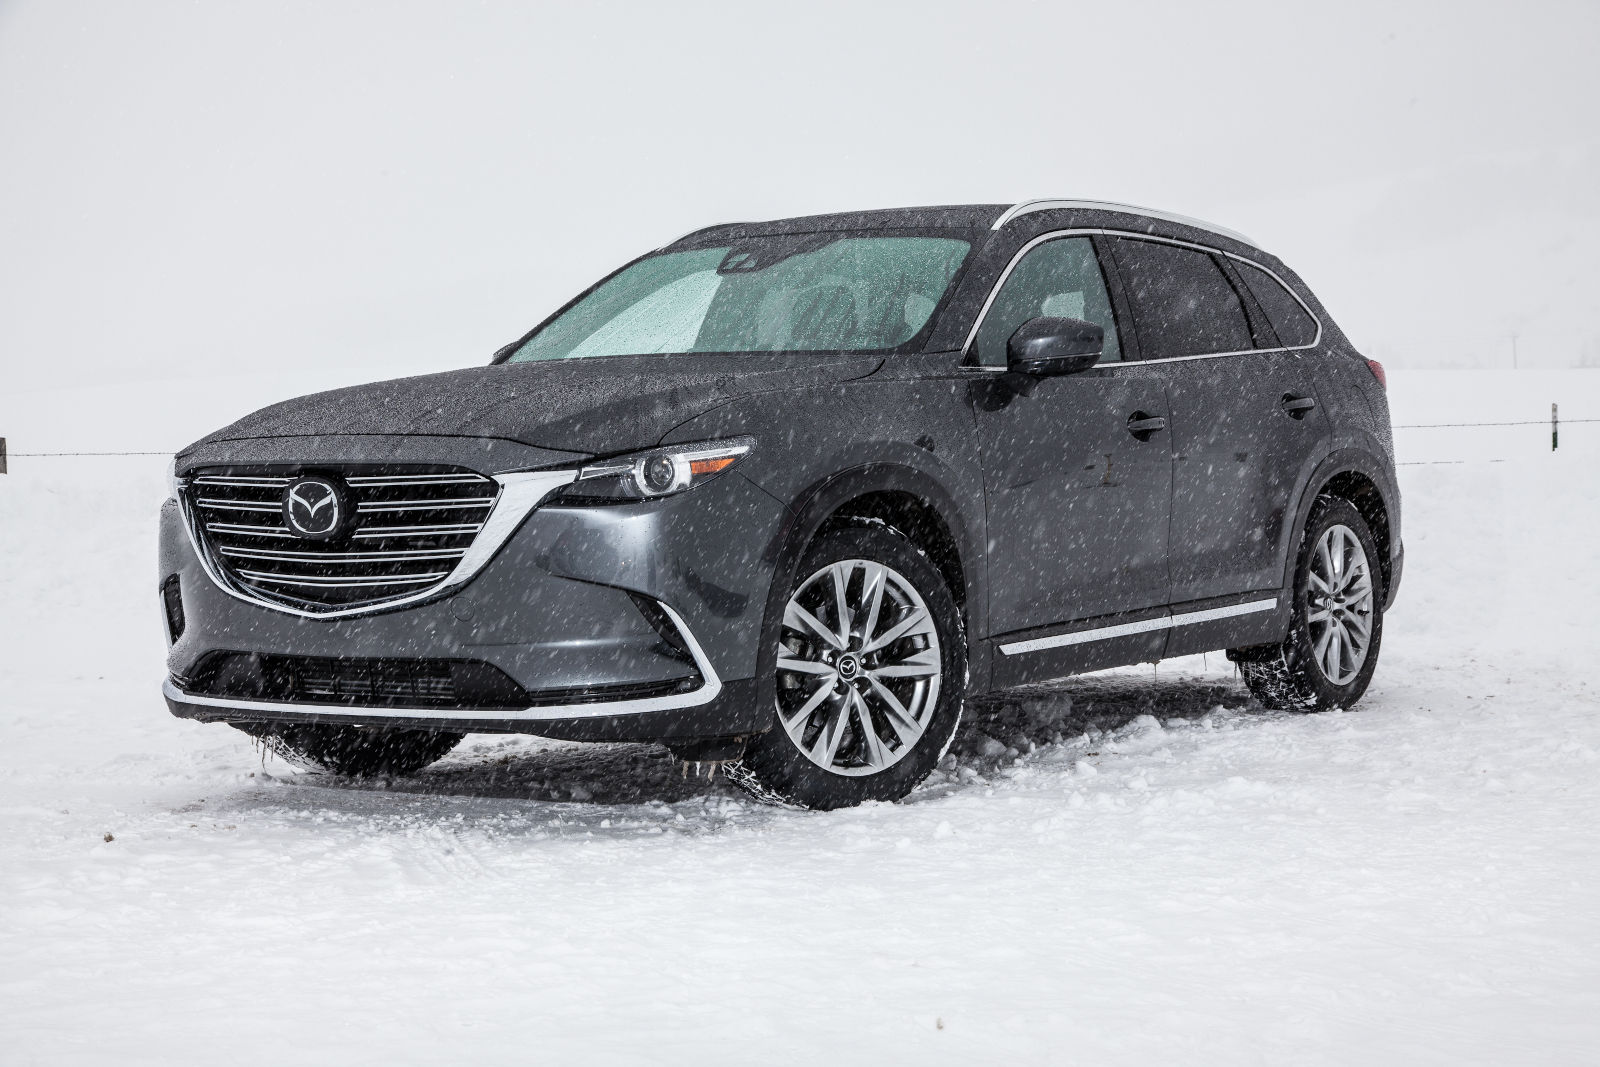 Choosing the Perfect Winter Tires for Your Mazda